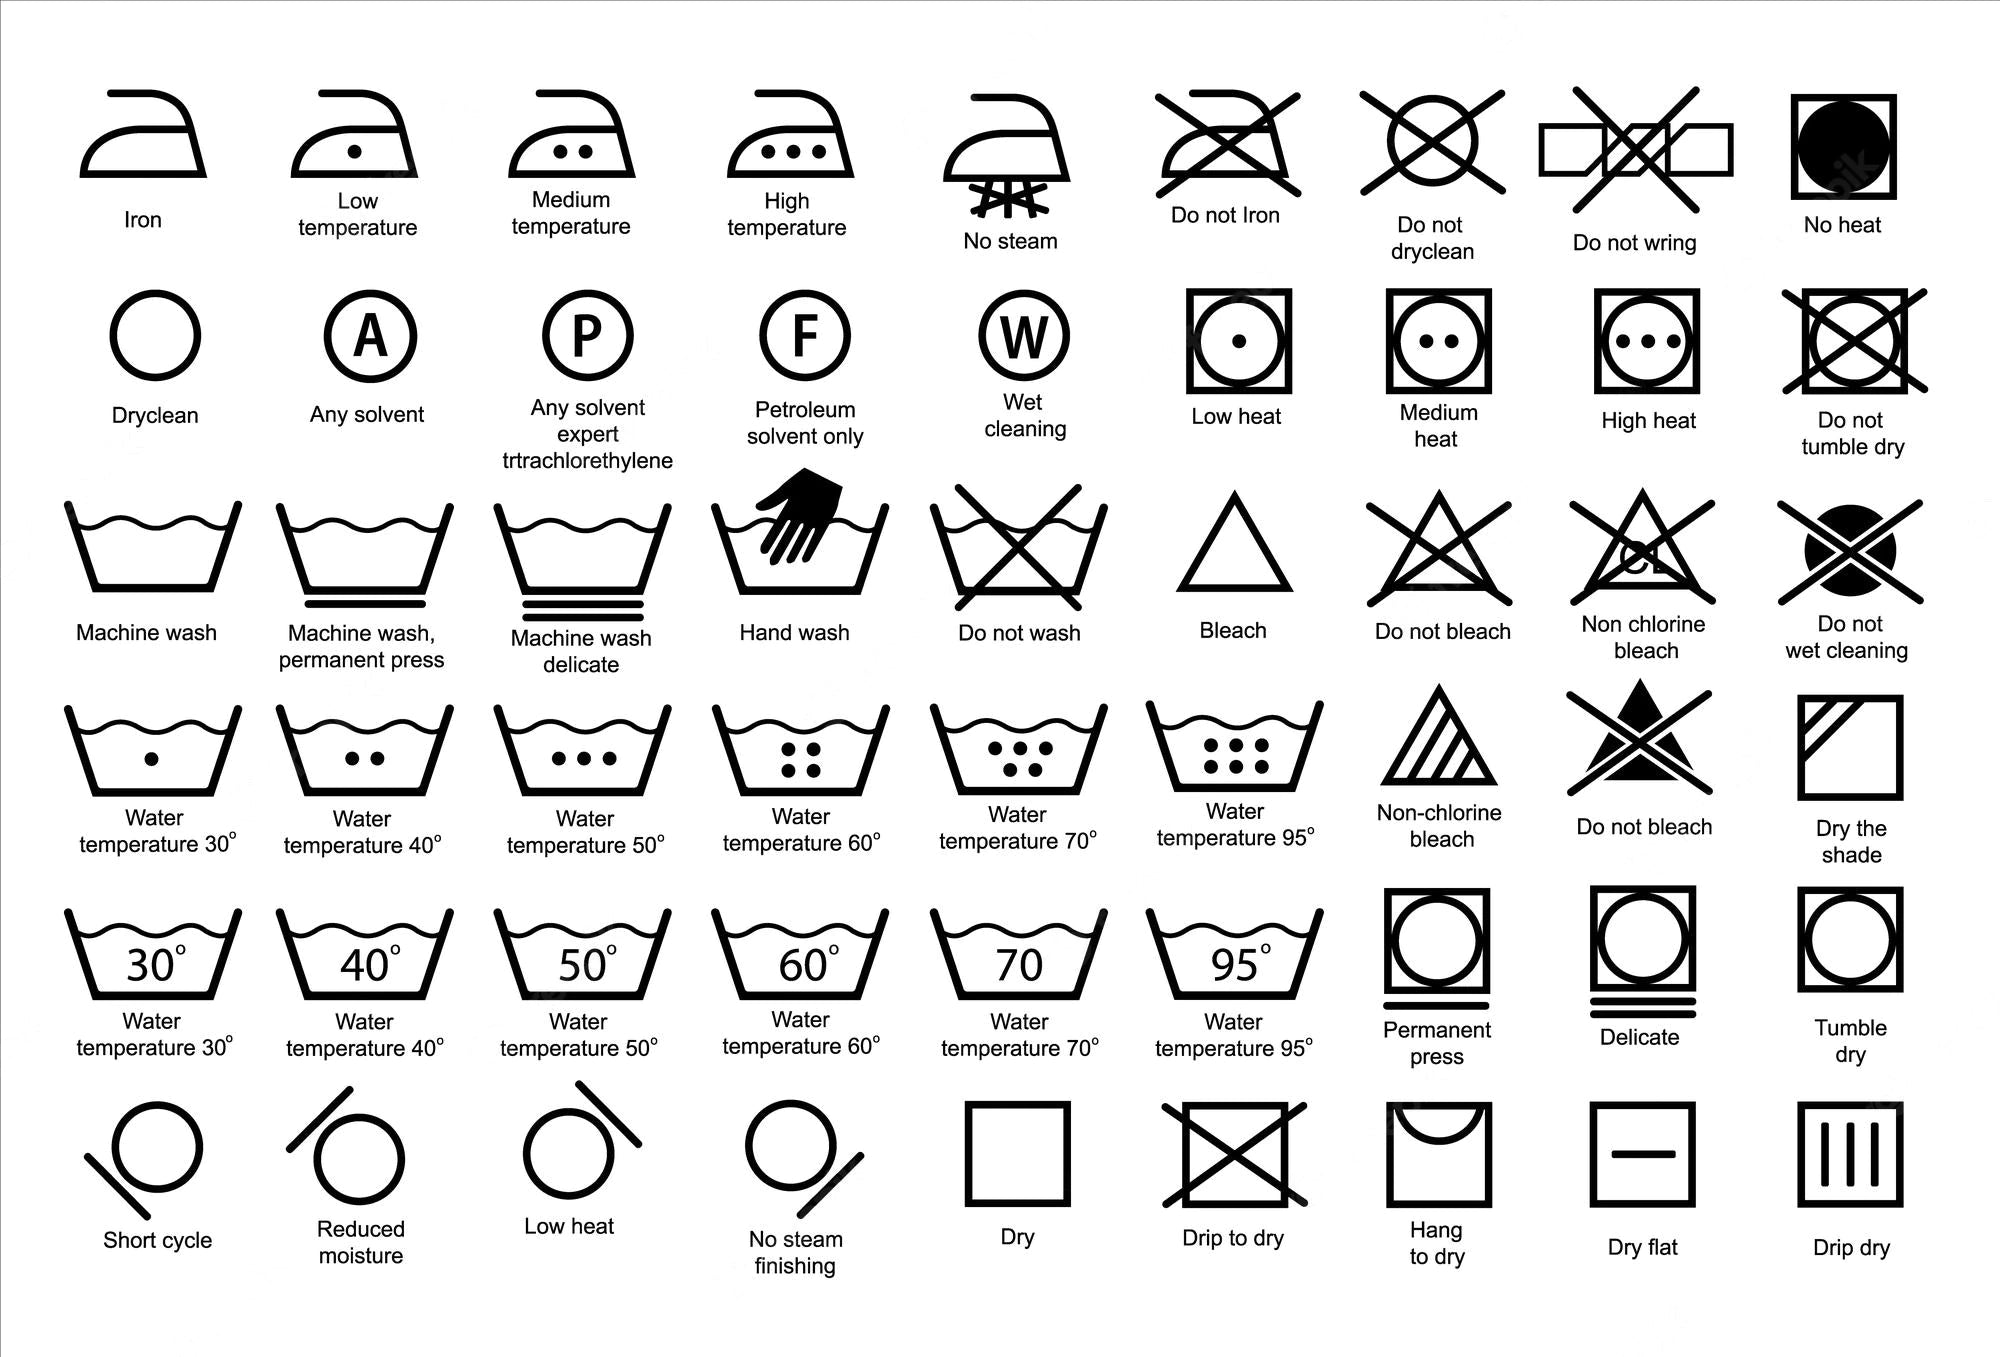 list of clothing care instructions, each with their symbol and explanation below.